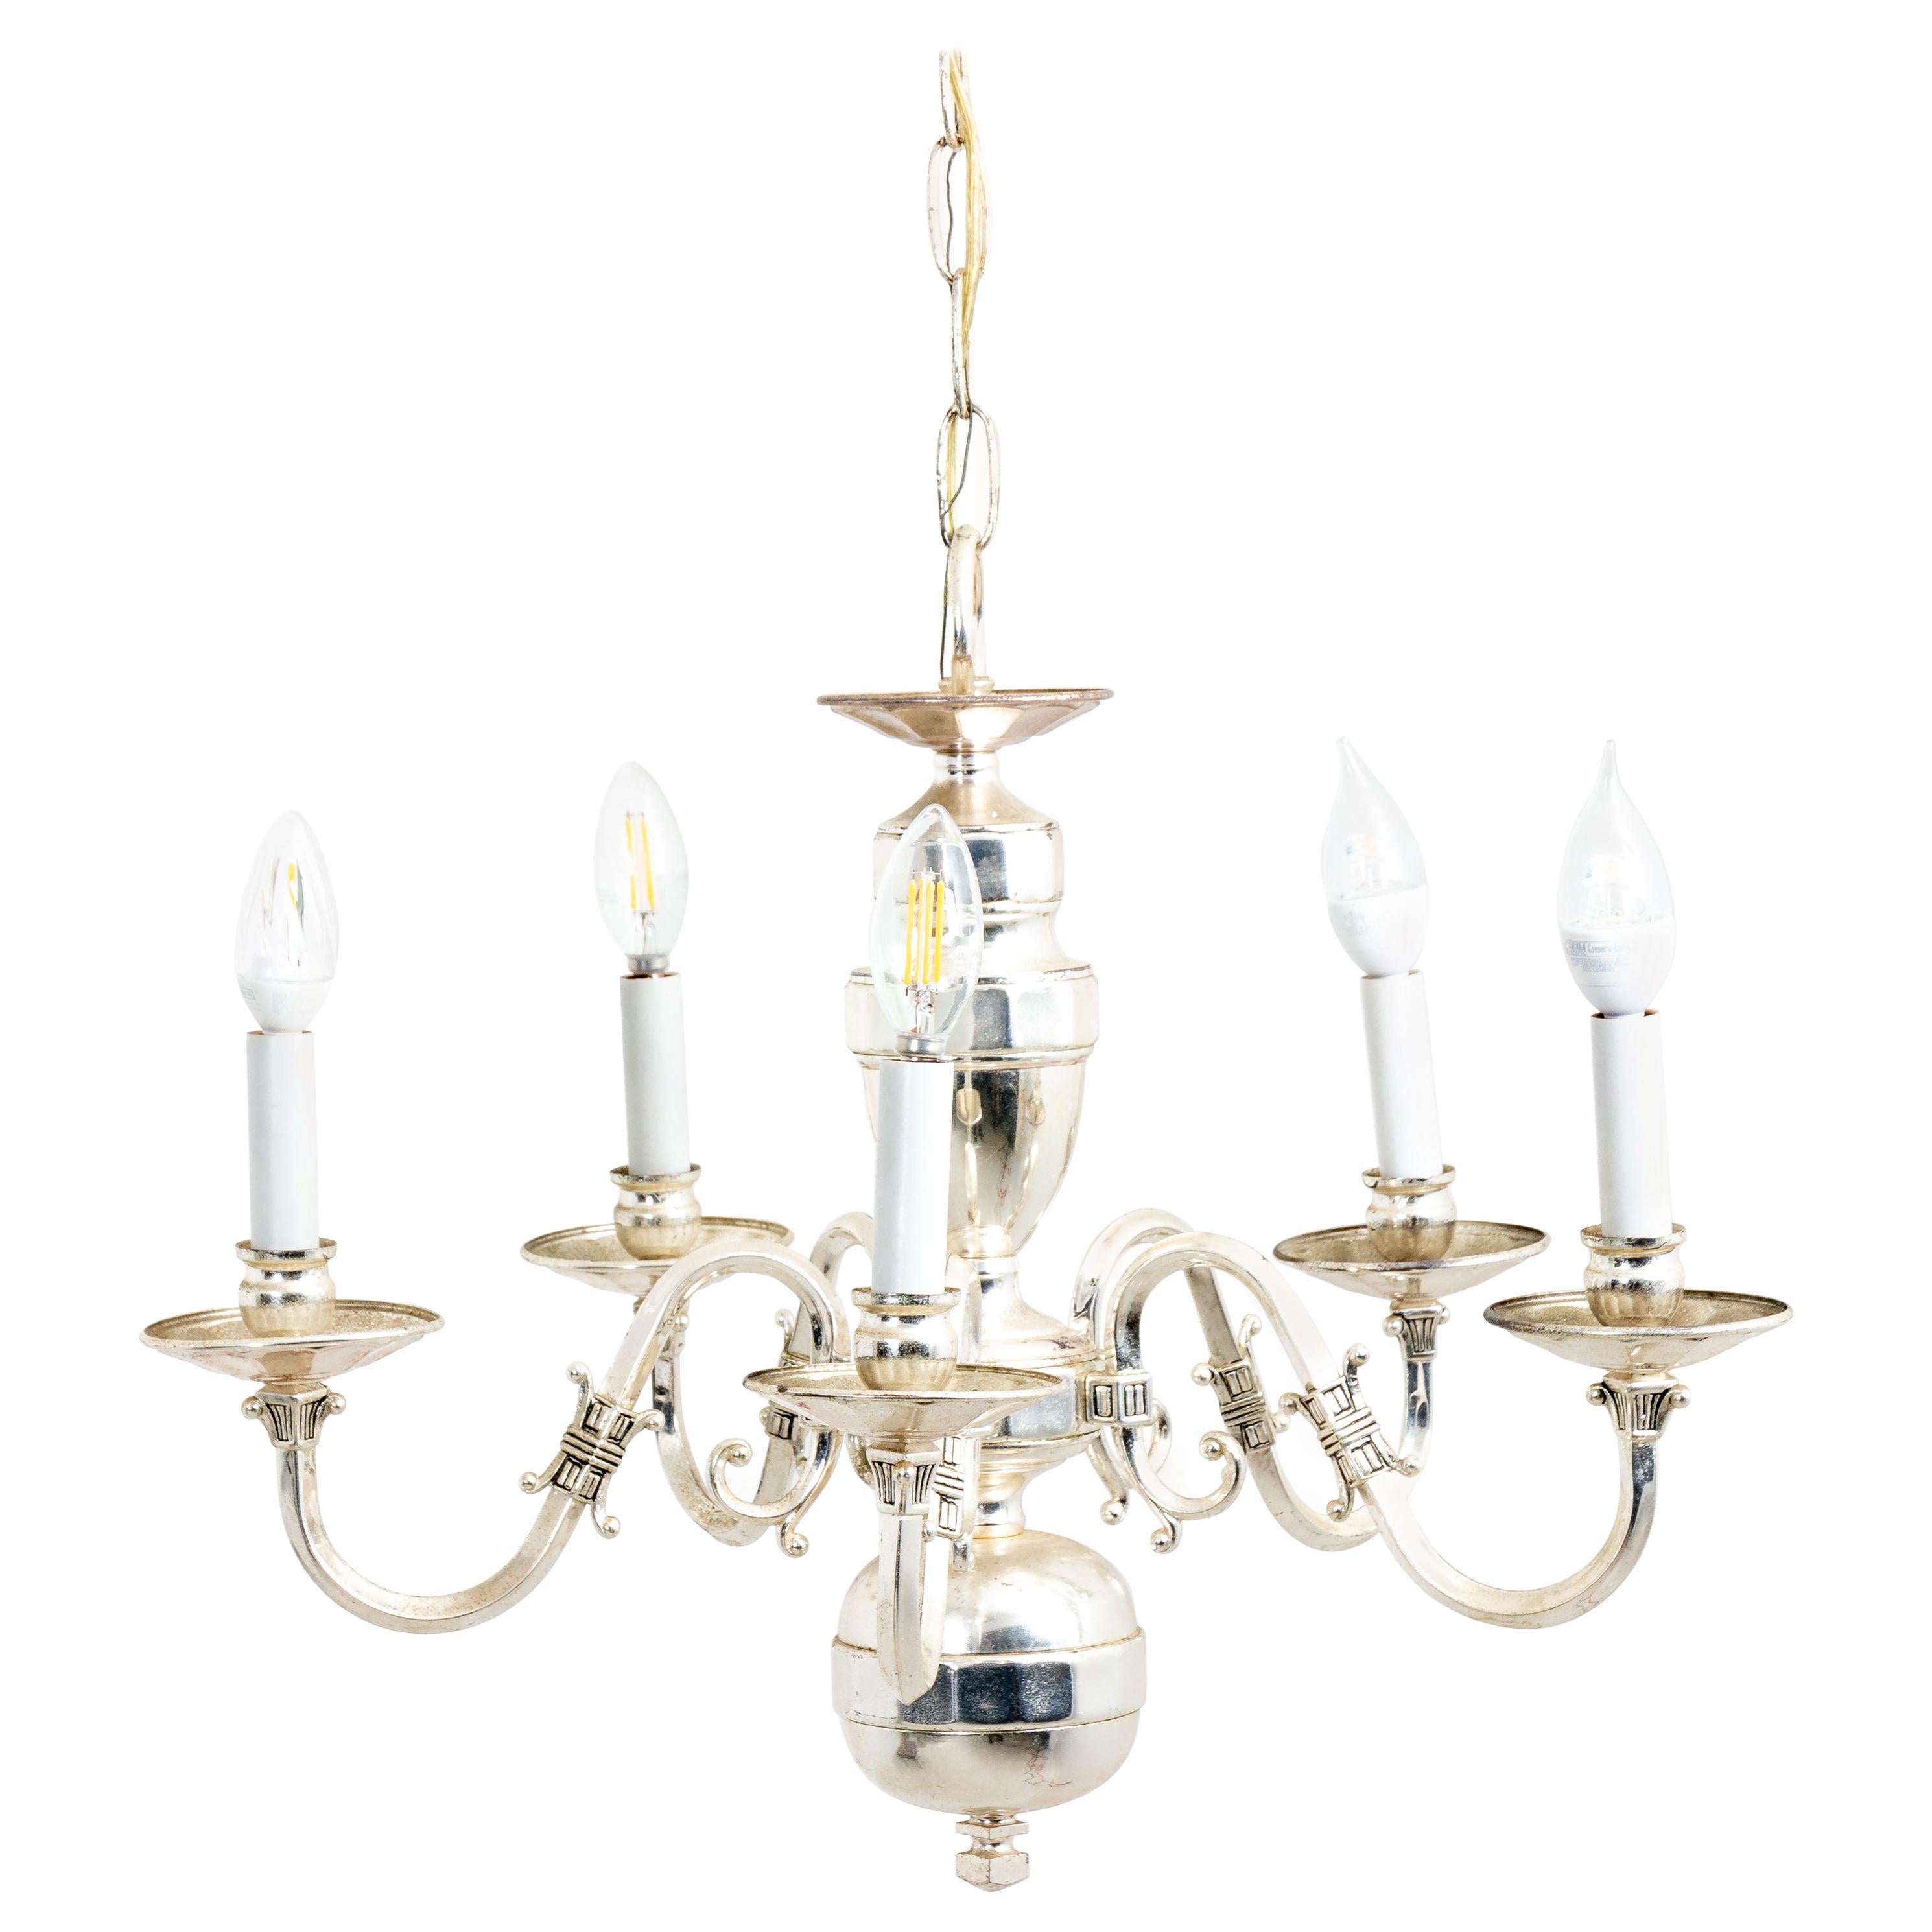 Silver Plated Five Arm Chandelier